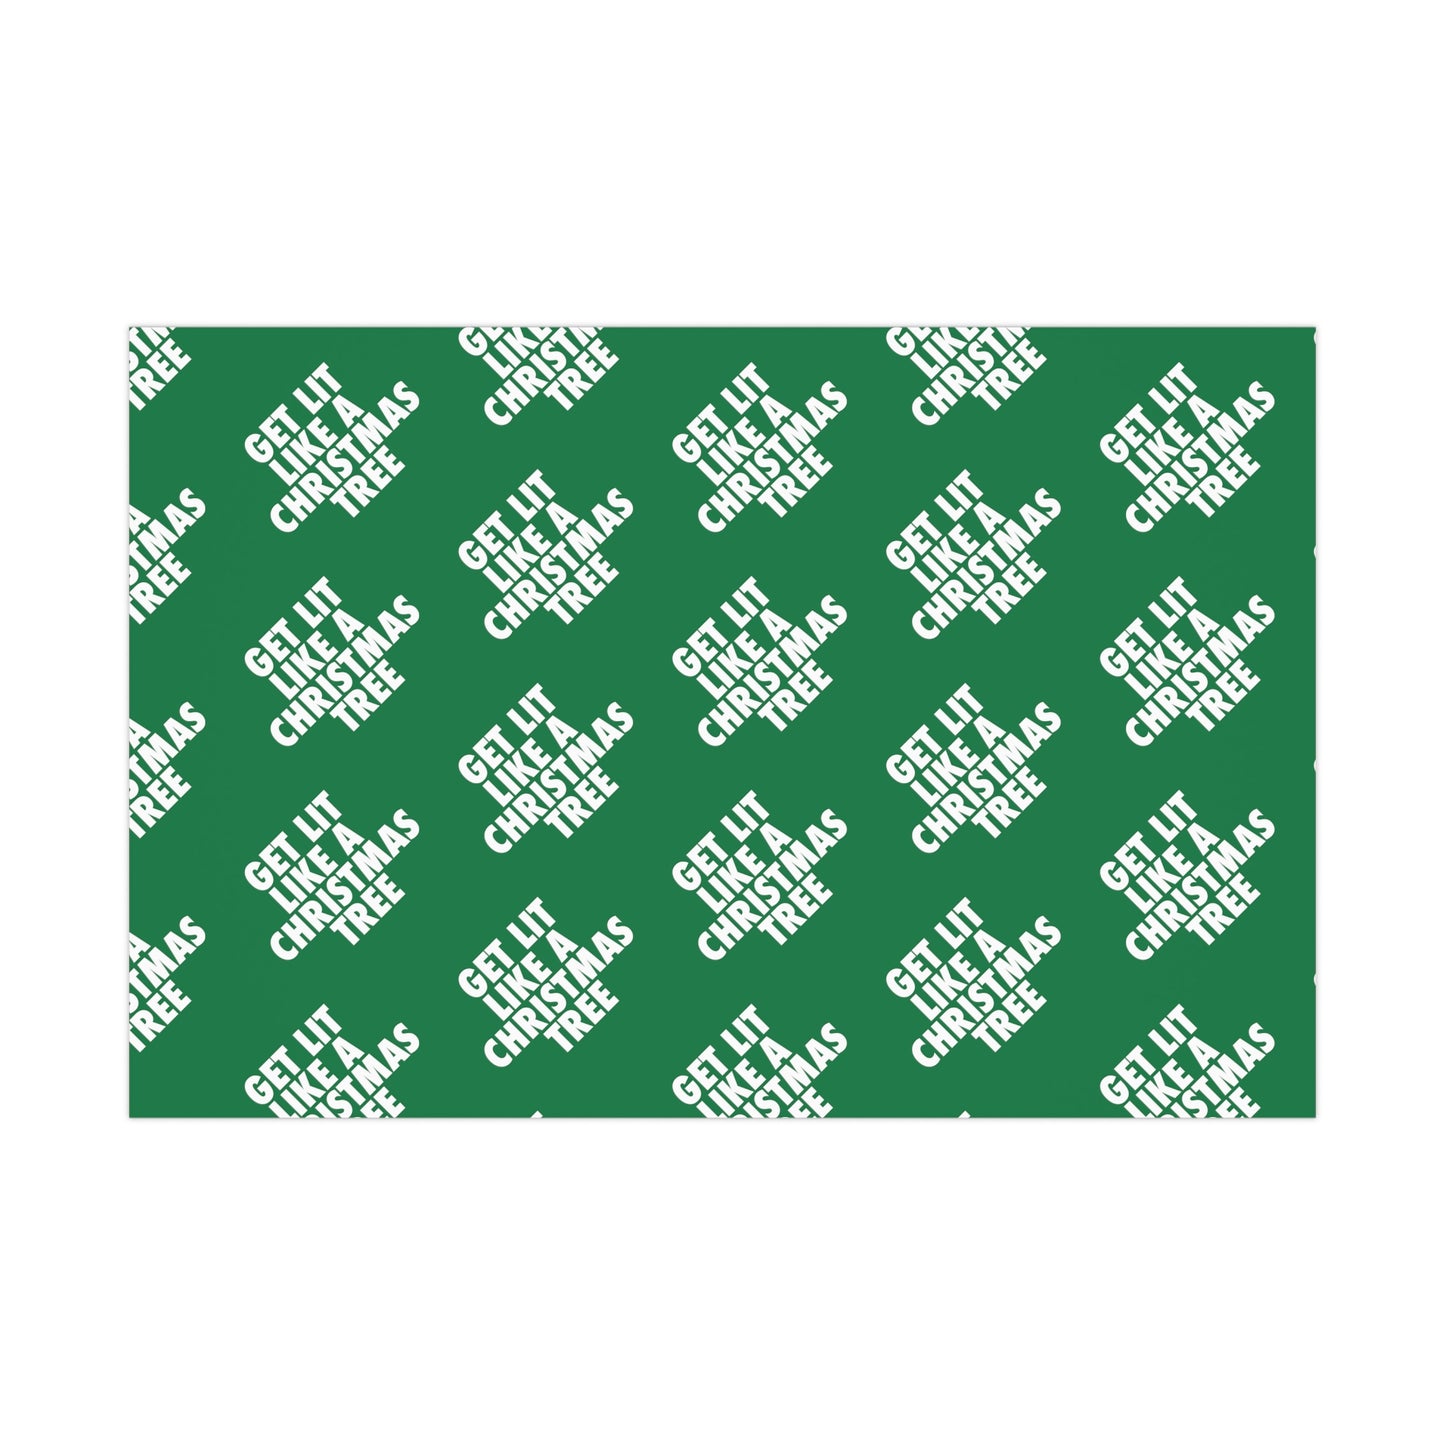 GET LIT LIKE A CHRISTMAS TREE Gift Wrap Papers